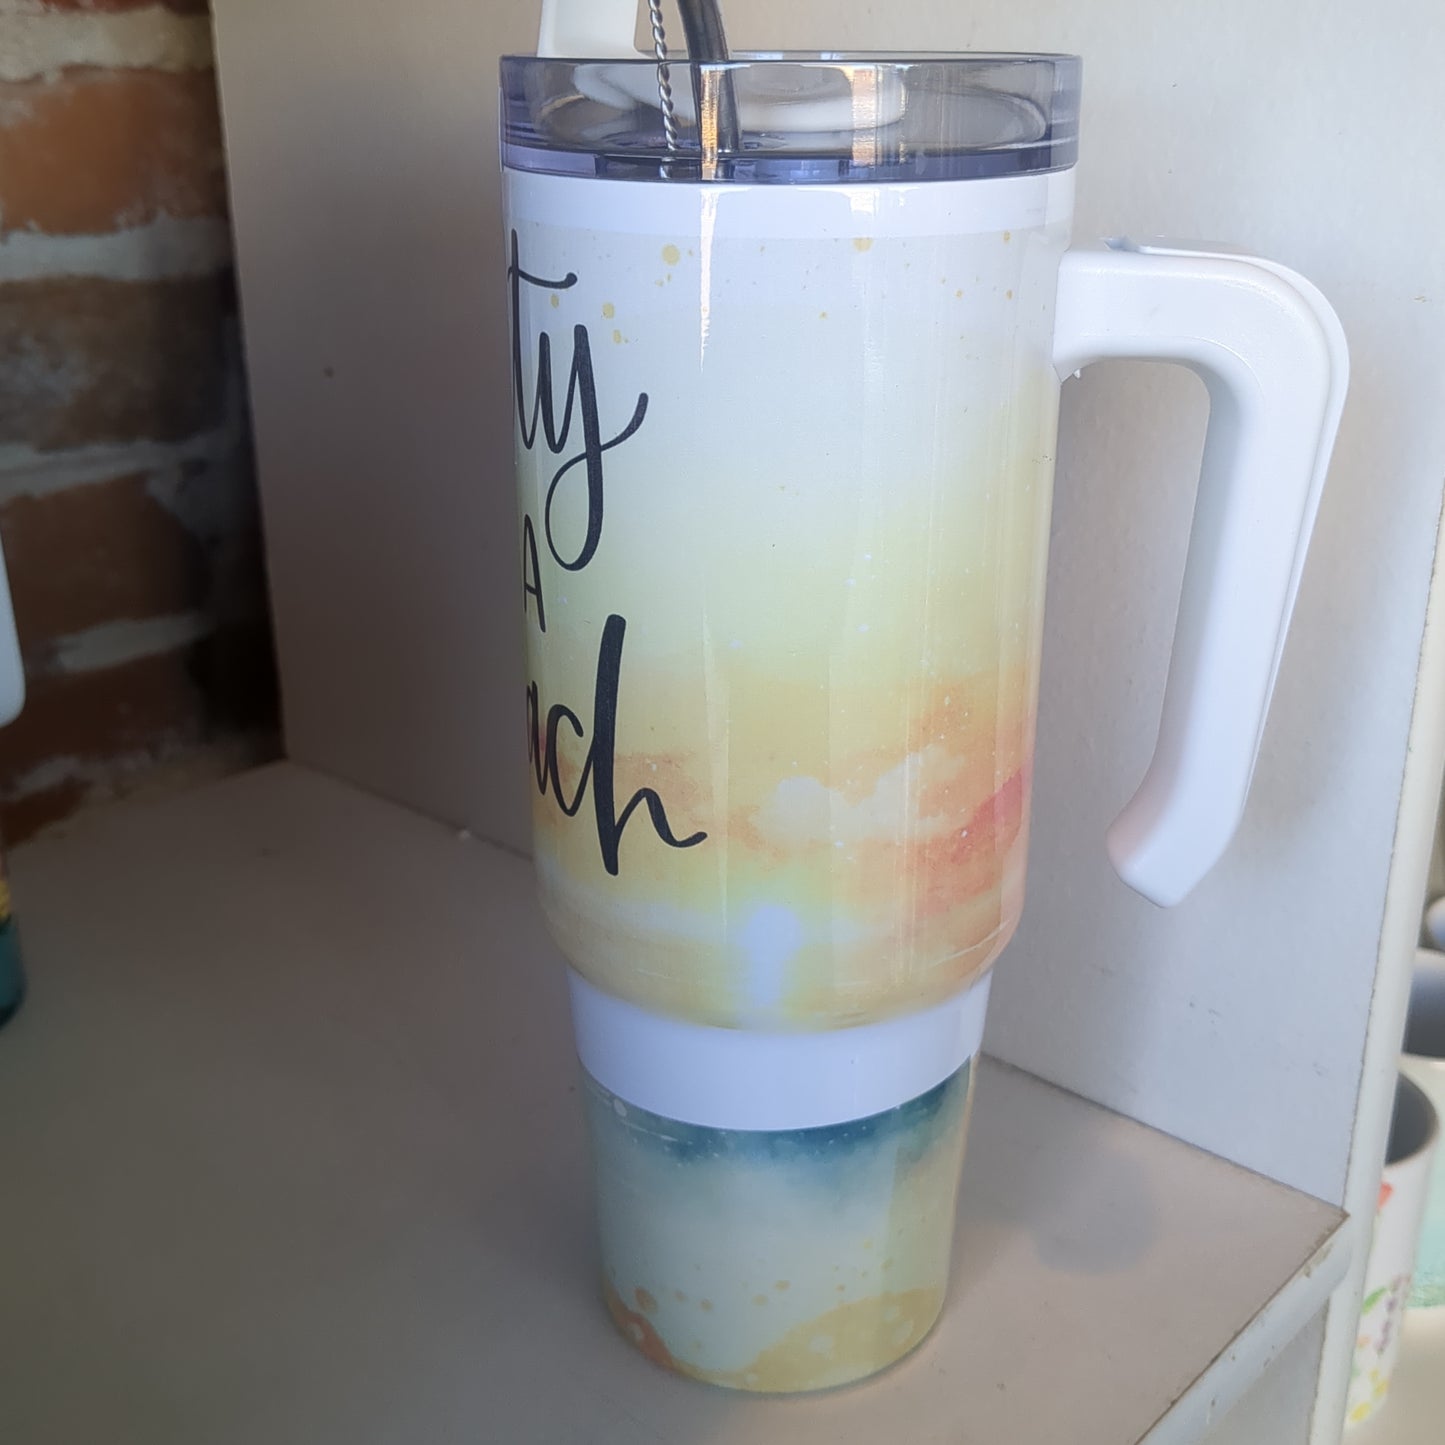 30 Oz Stainless steel Insulated Tumbler salty as a beach with minor flaws